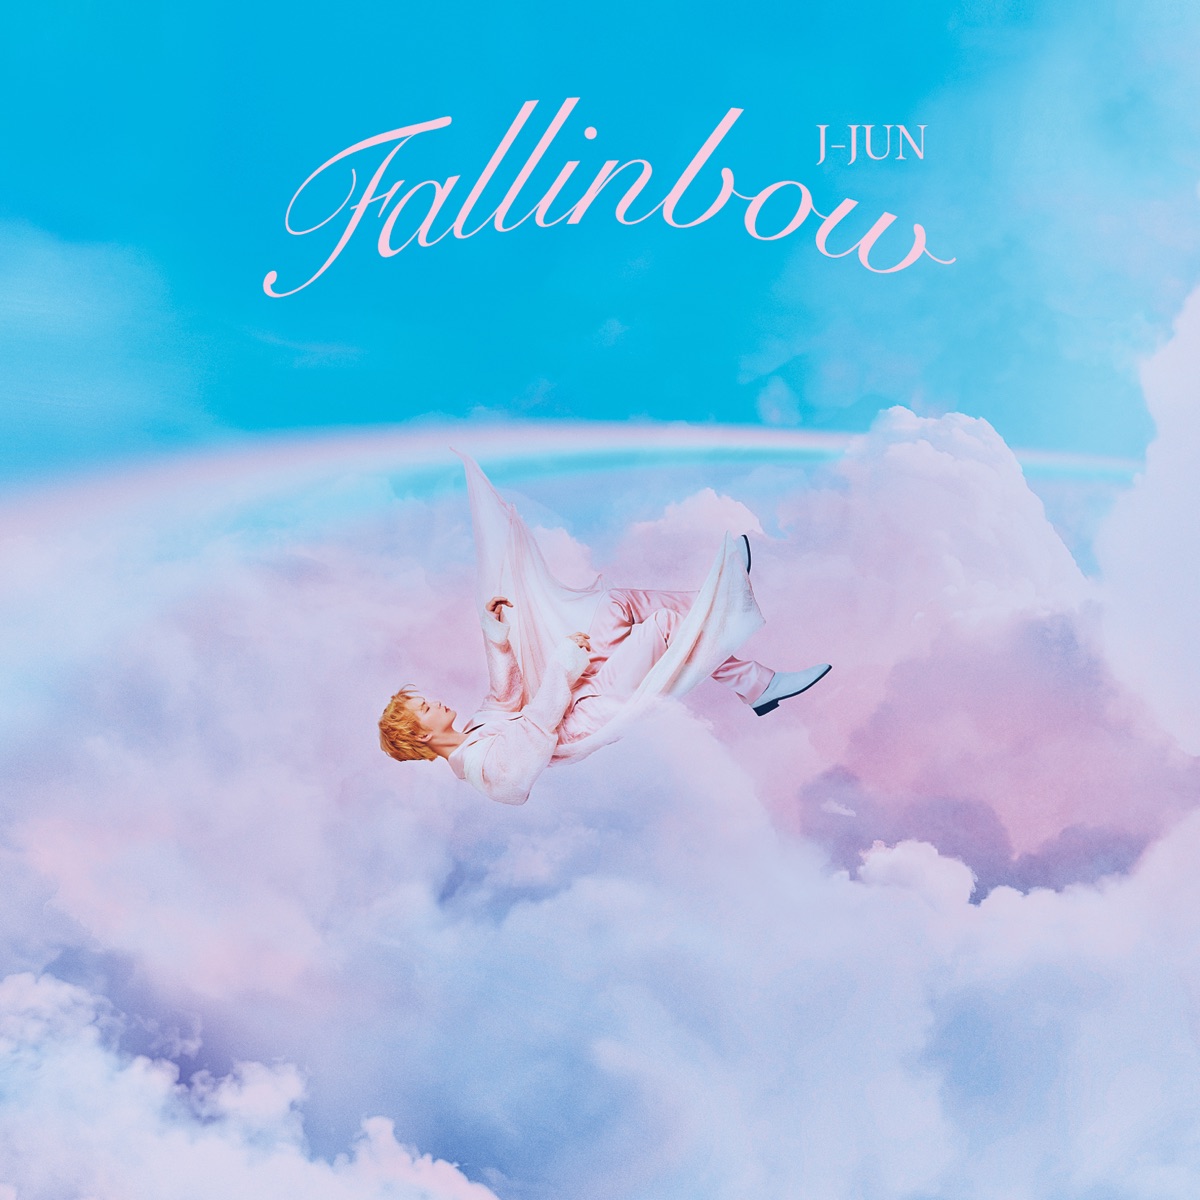 Cover art for『J-JUN - Bang!』from the release『Fallinbow